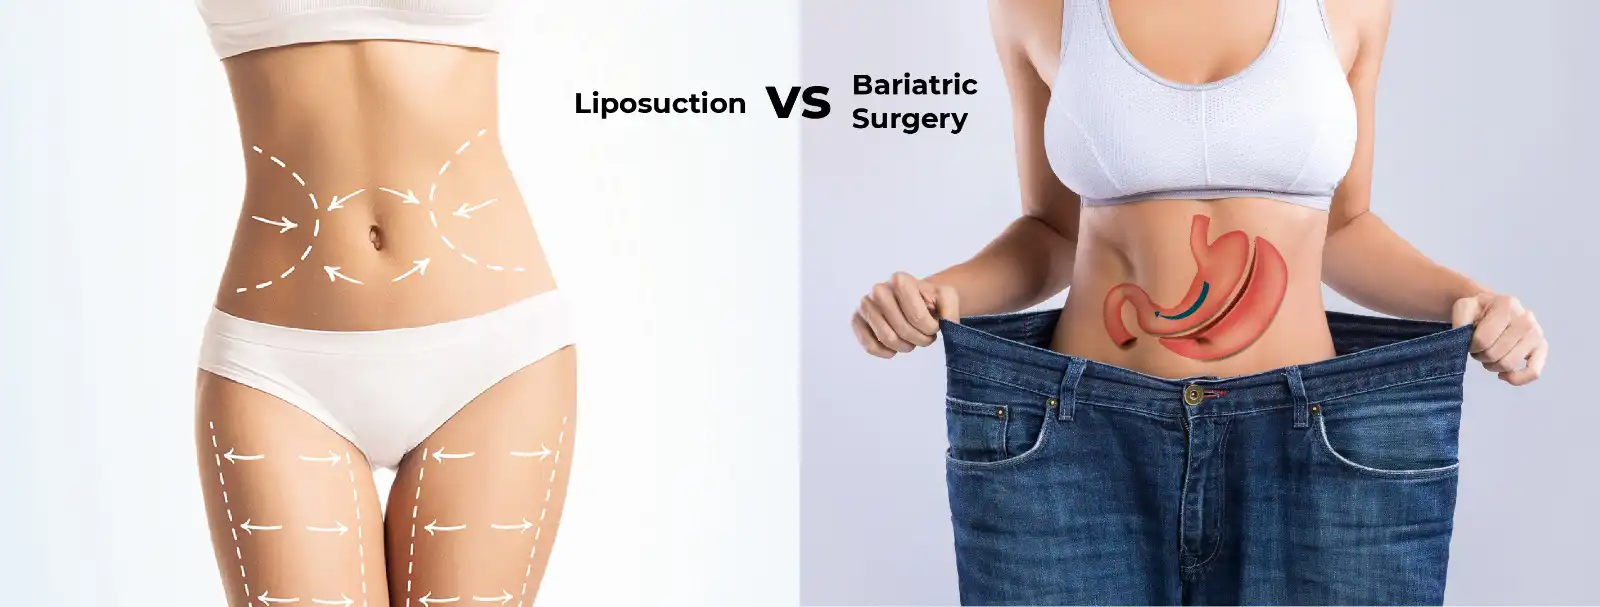 Tummy Tuck Surgery After Weight Loss or Liposuction - Dr Ali